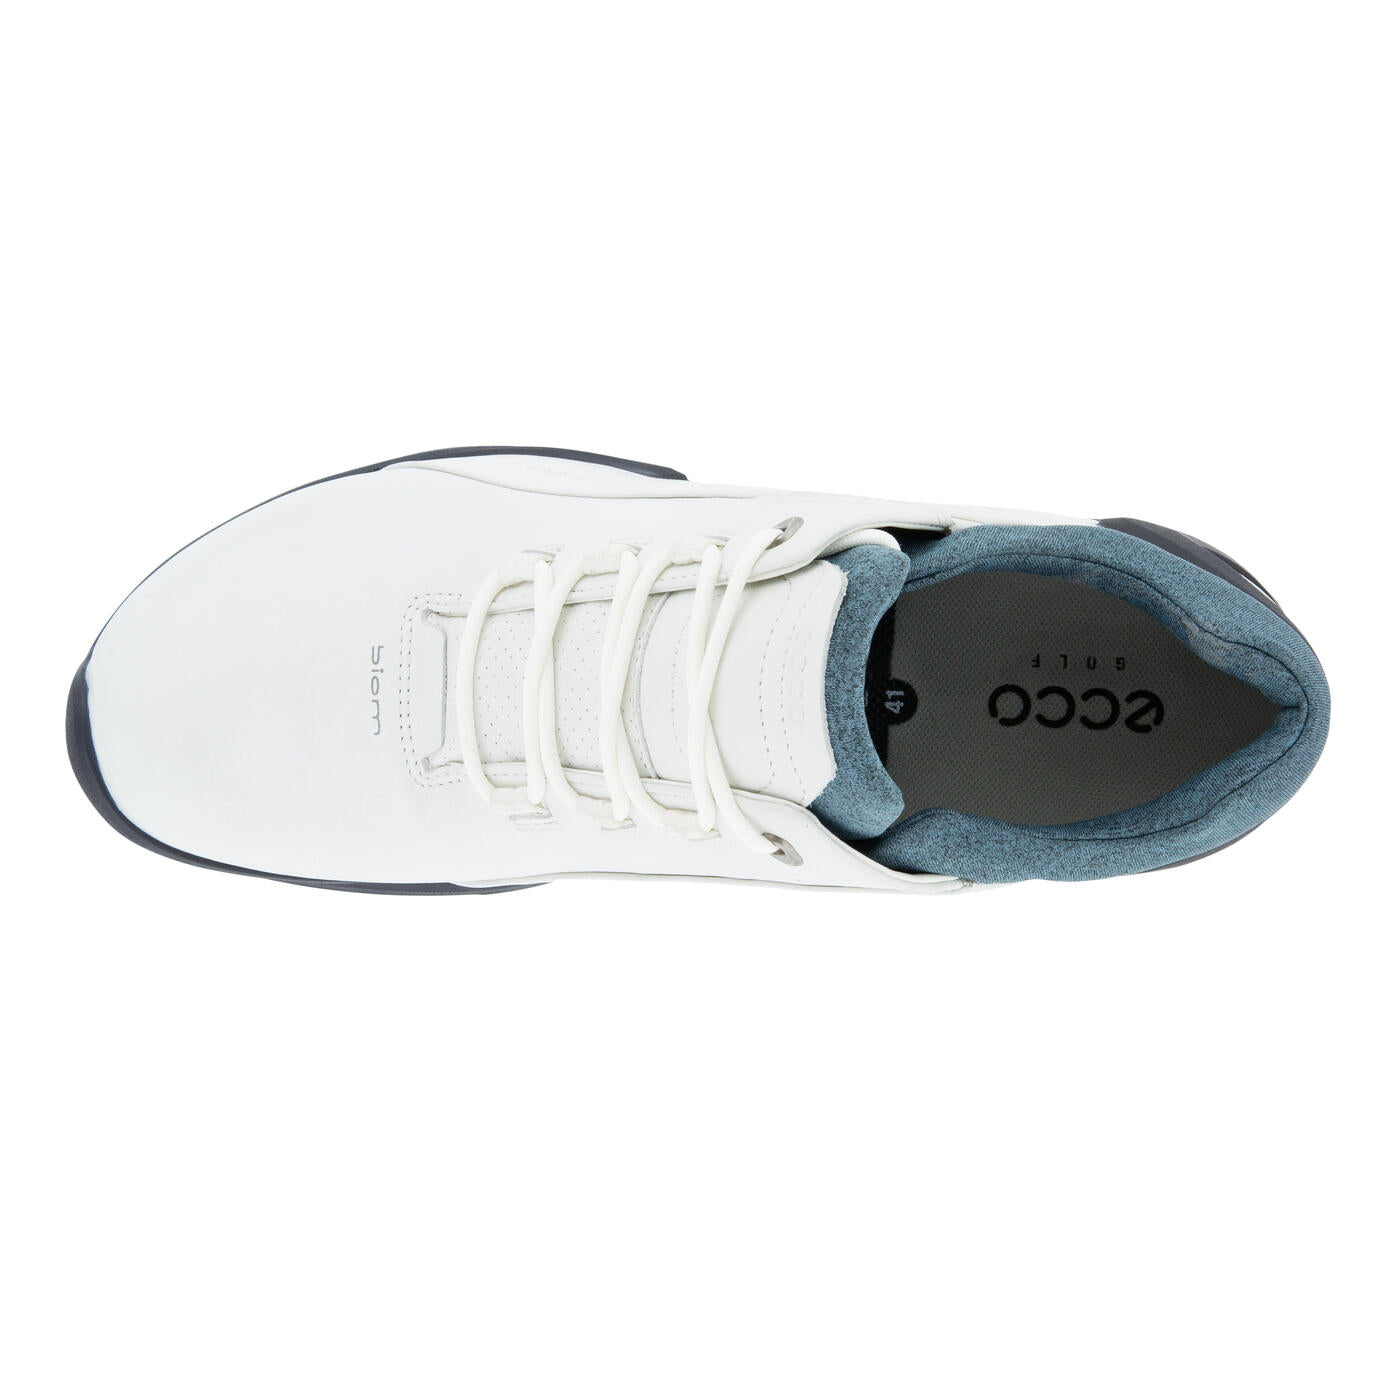 Ecco Mens Biom G3 Cleated Golf Shoes